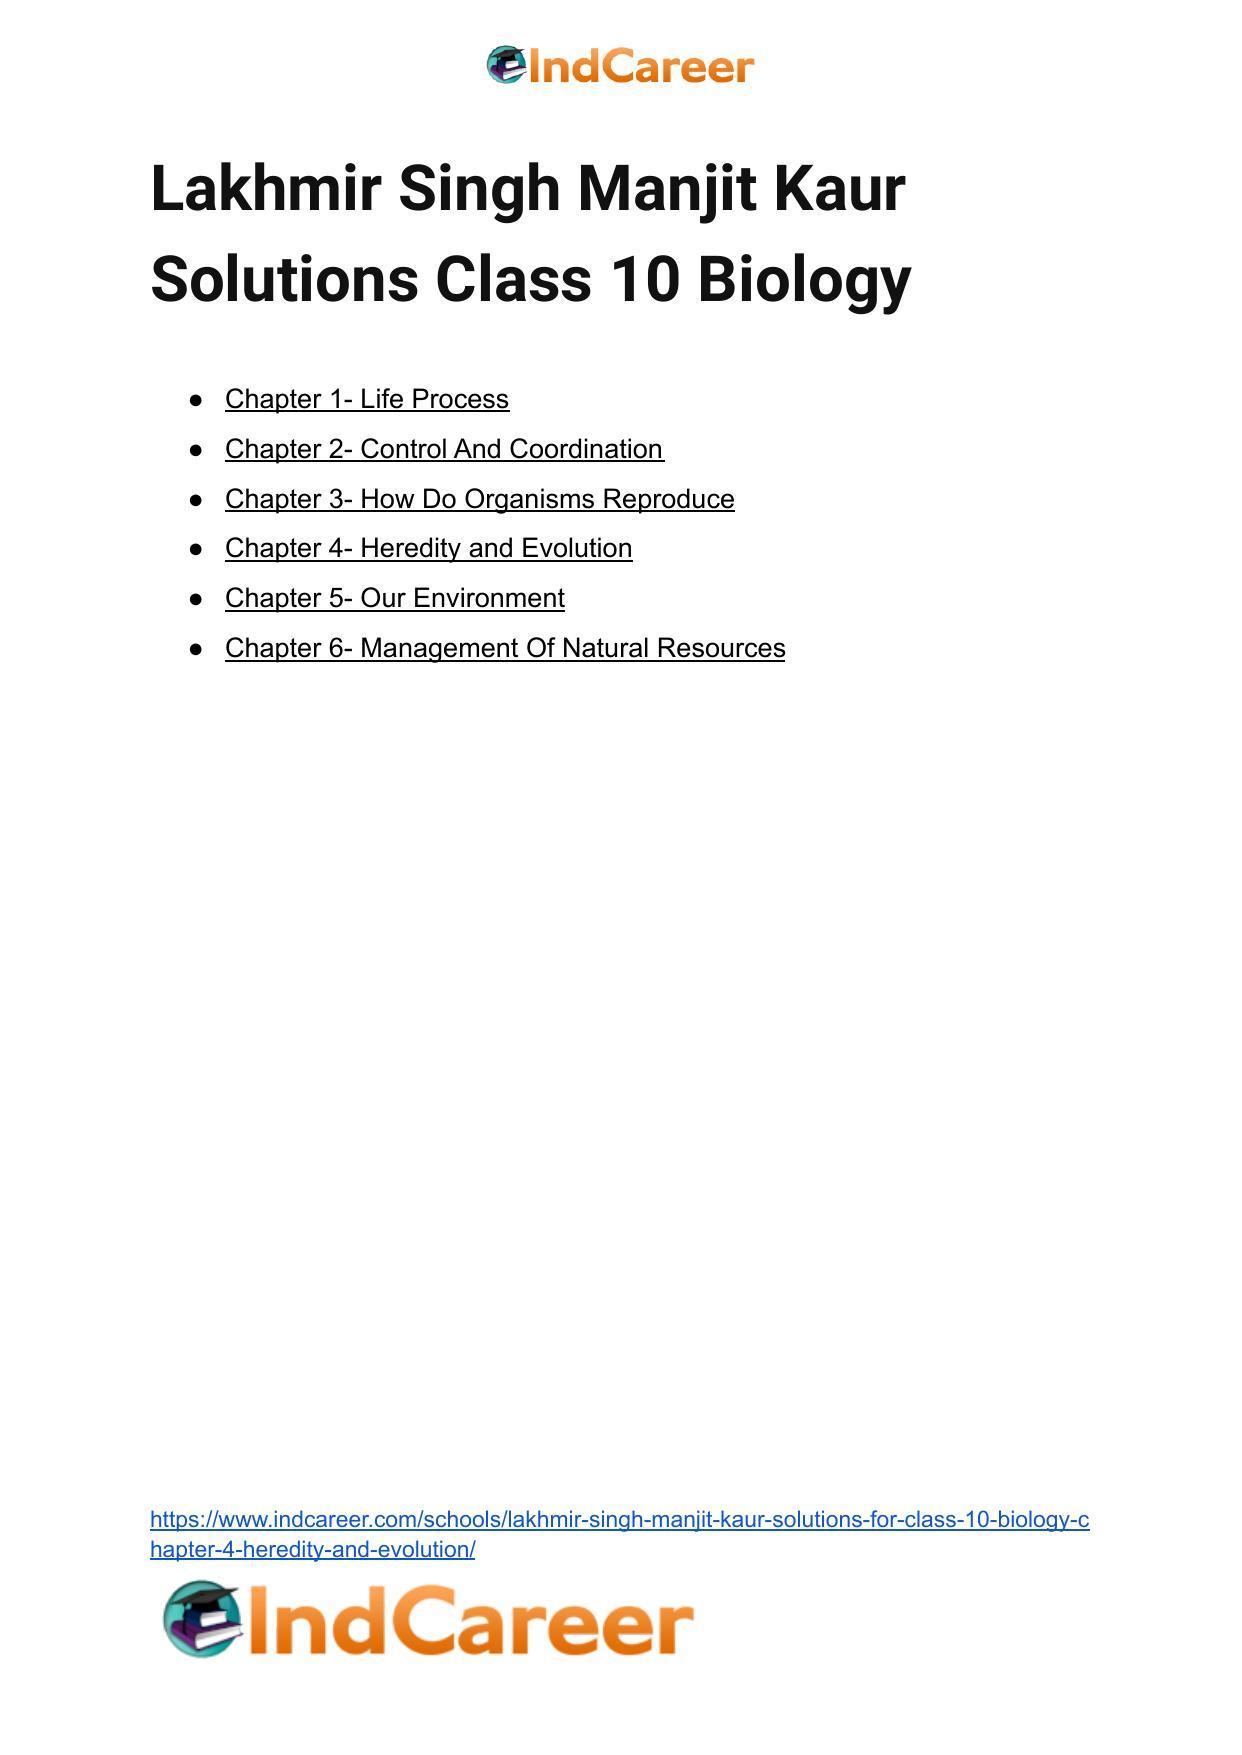 Lakhmir Singh Manjit Kaur  Solutions for Class 10 Biology: Chapter 4- Heredity and Evolution - Page 22